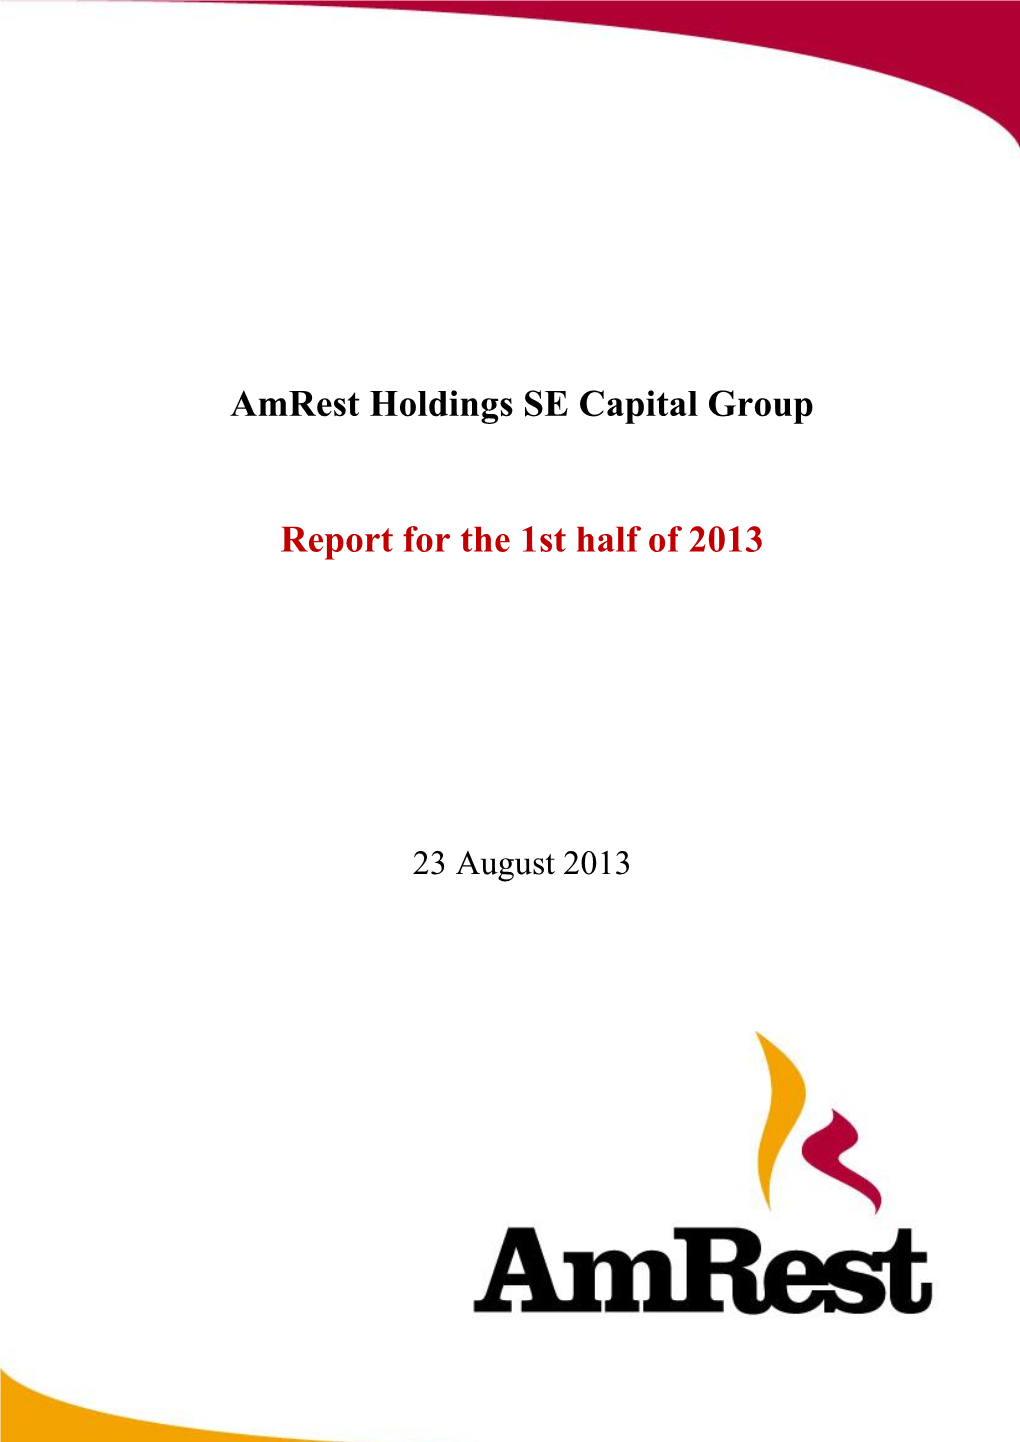 Amrest Holdings SE Capital Group Report for the 1St Half of 2013